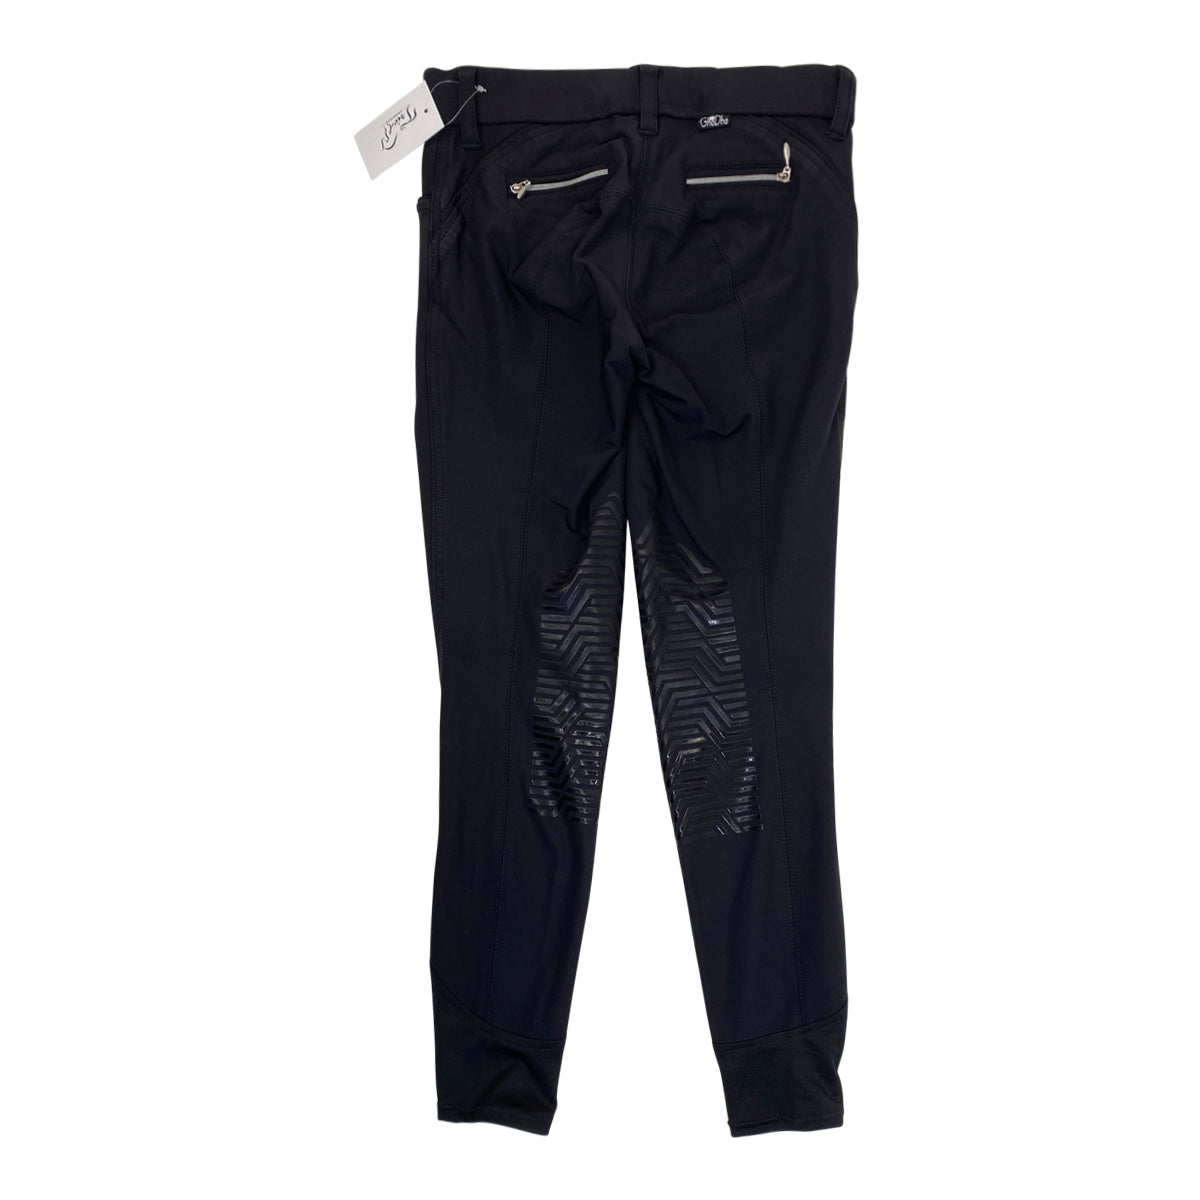 GhoDho 'Aubrie Pro Meryl' Breeches in Black